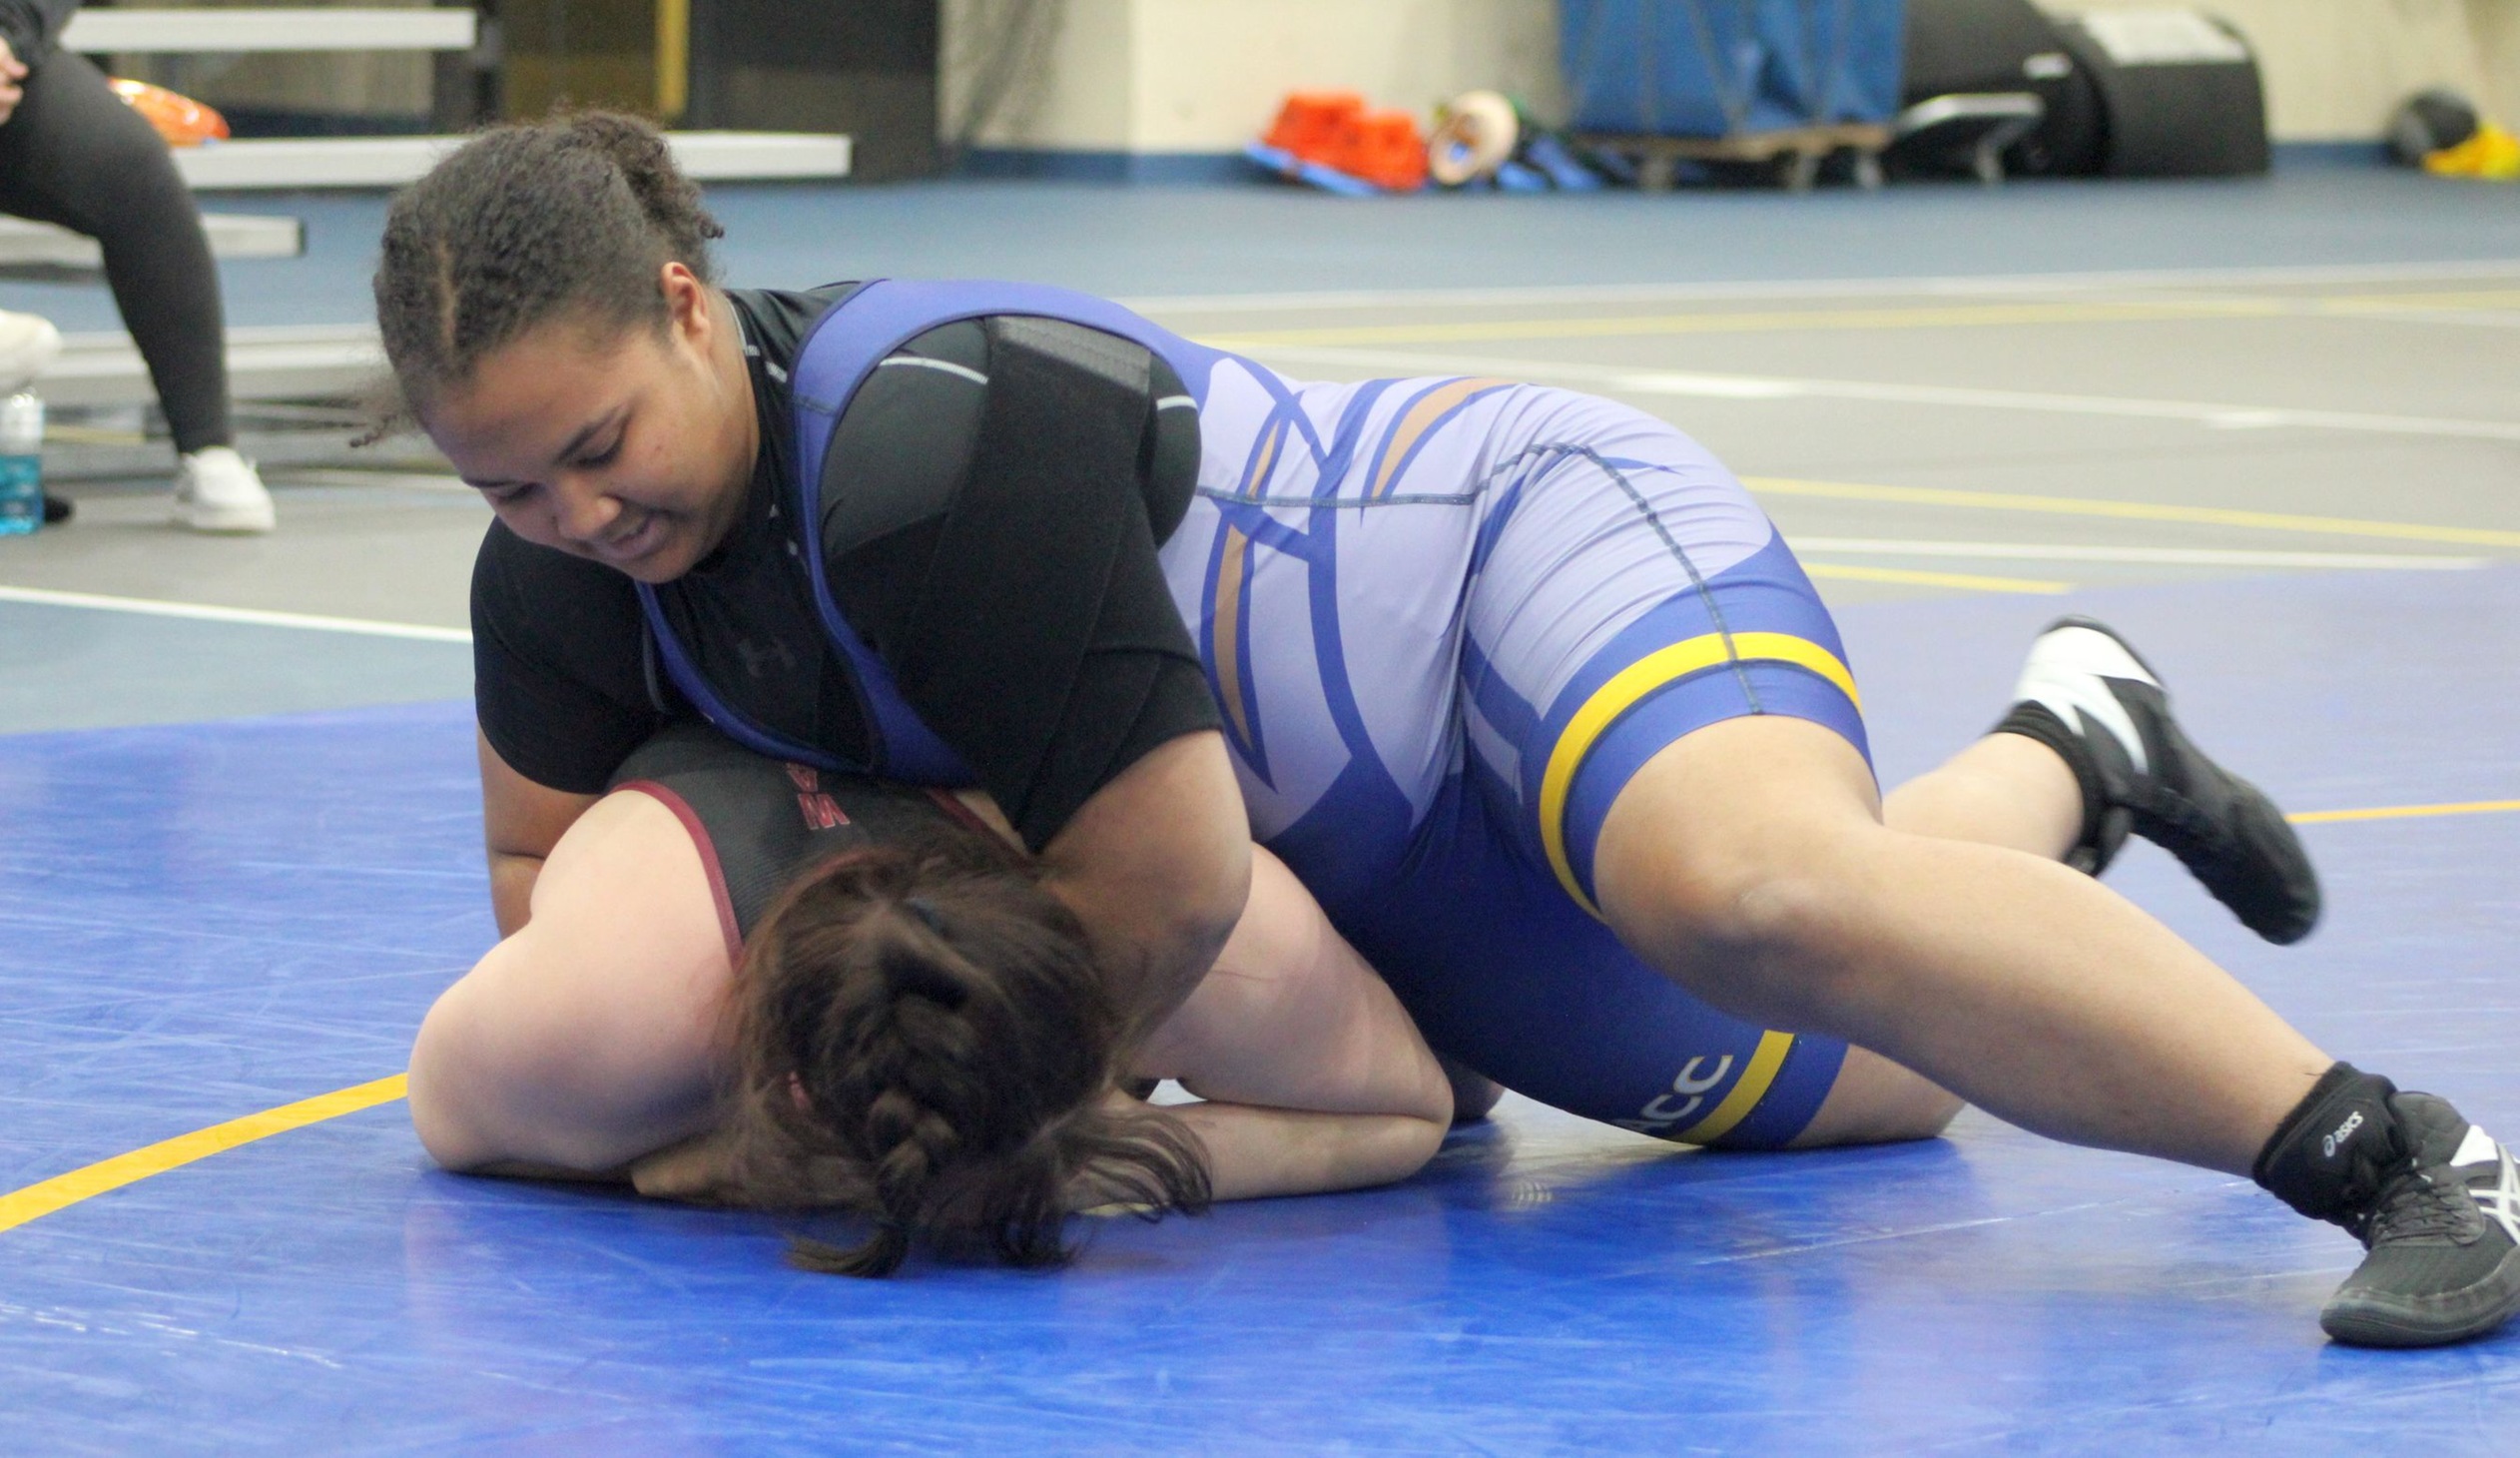 NIACC's Valerie Smith is ranked fourth at 235 pounds in the latest NJCAA rankings.